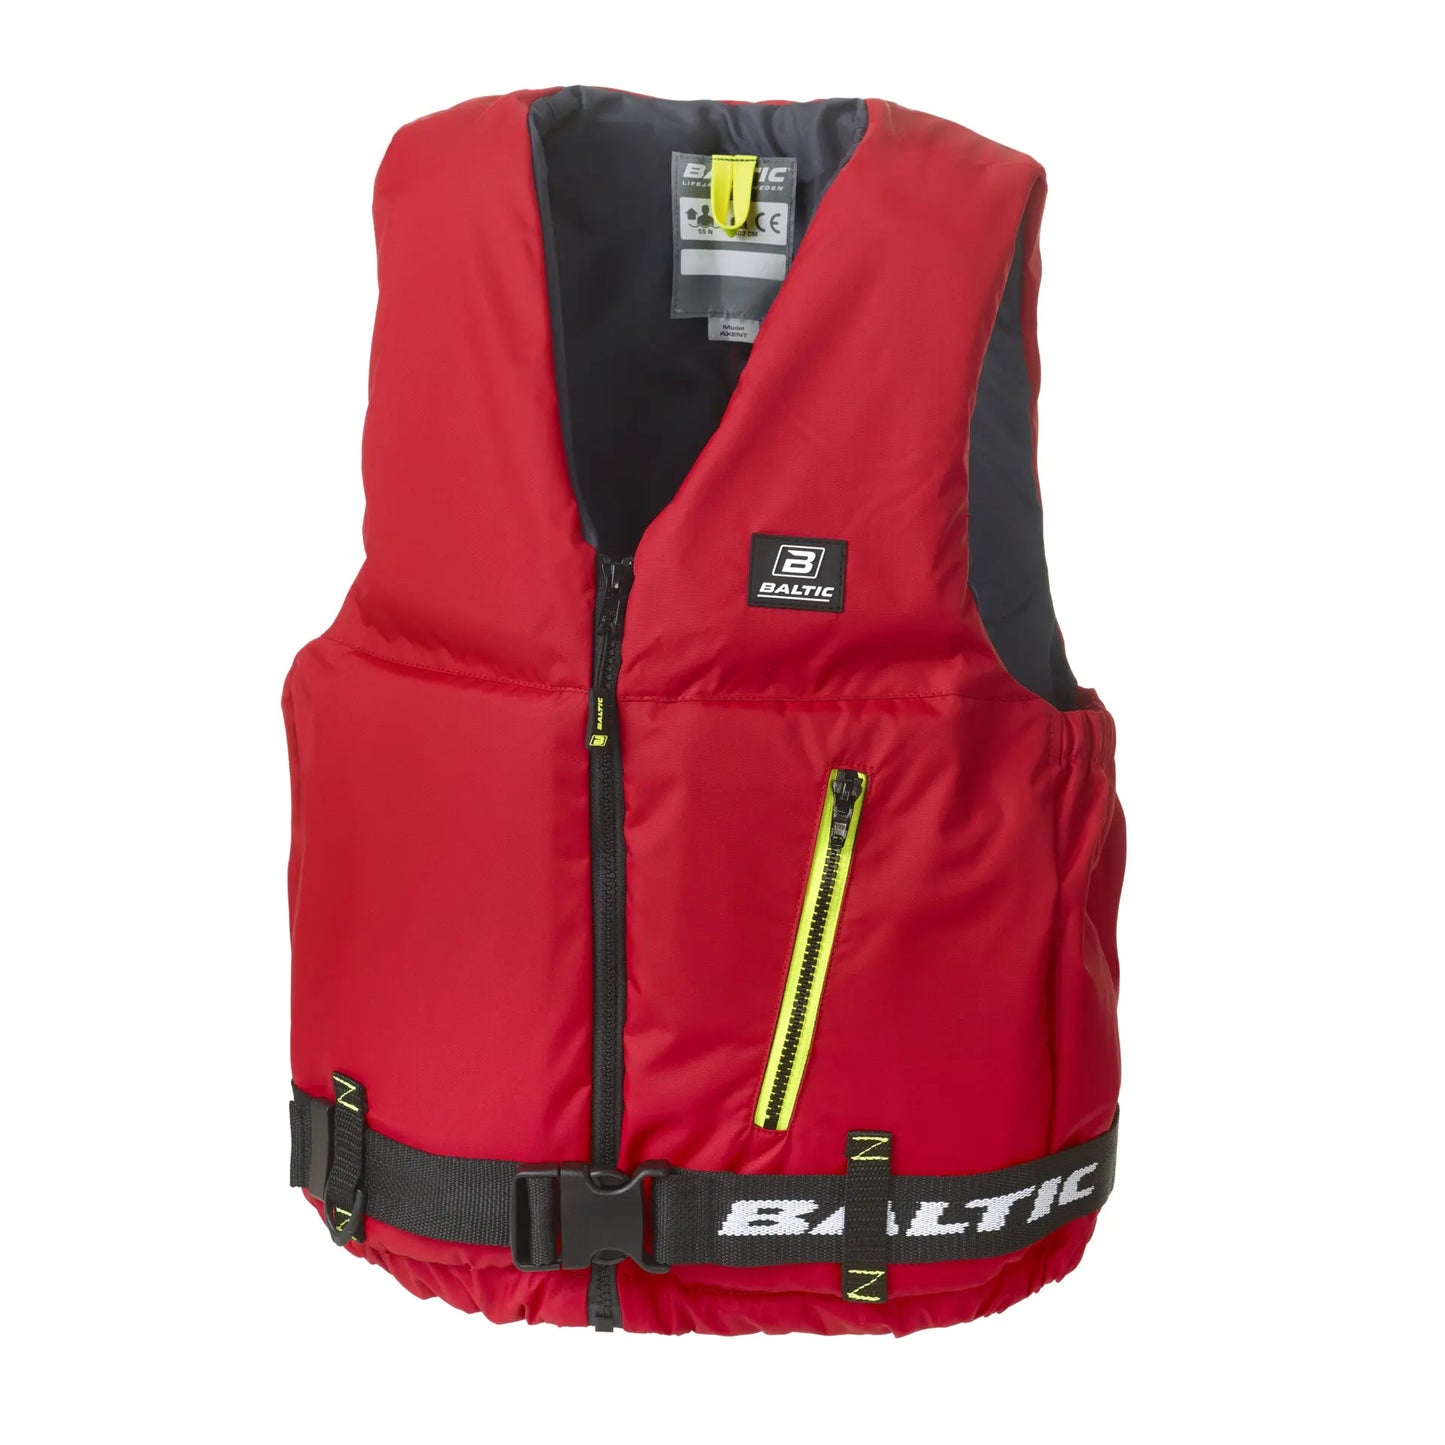 Axent Buoyancy aid